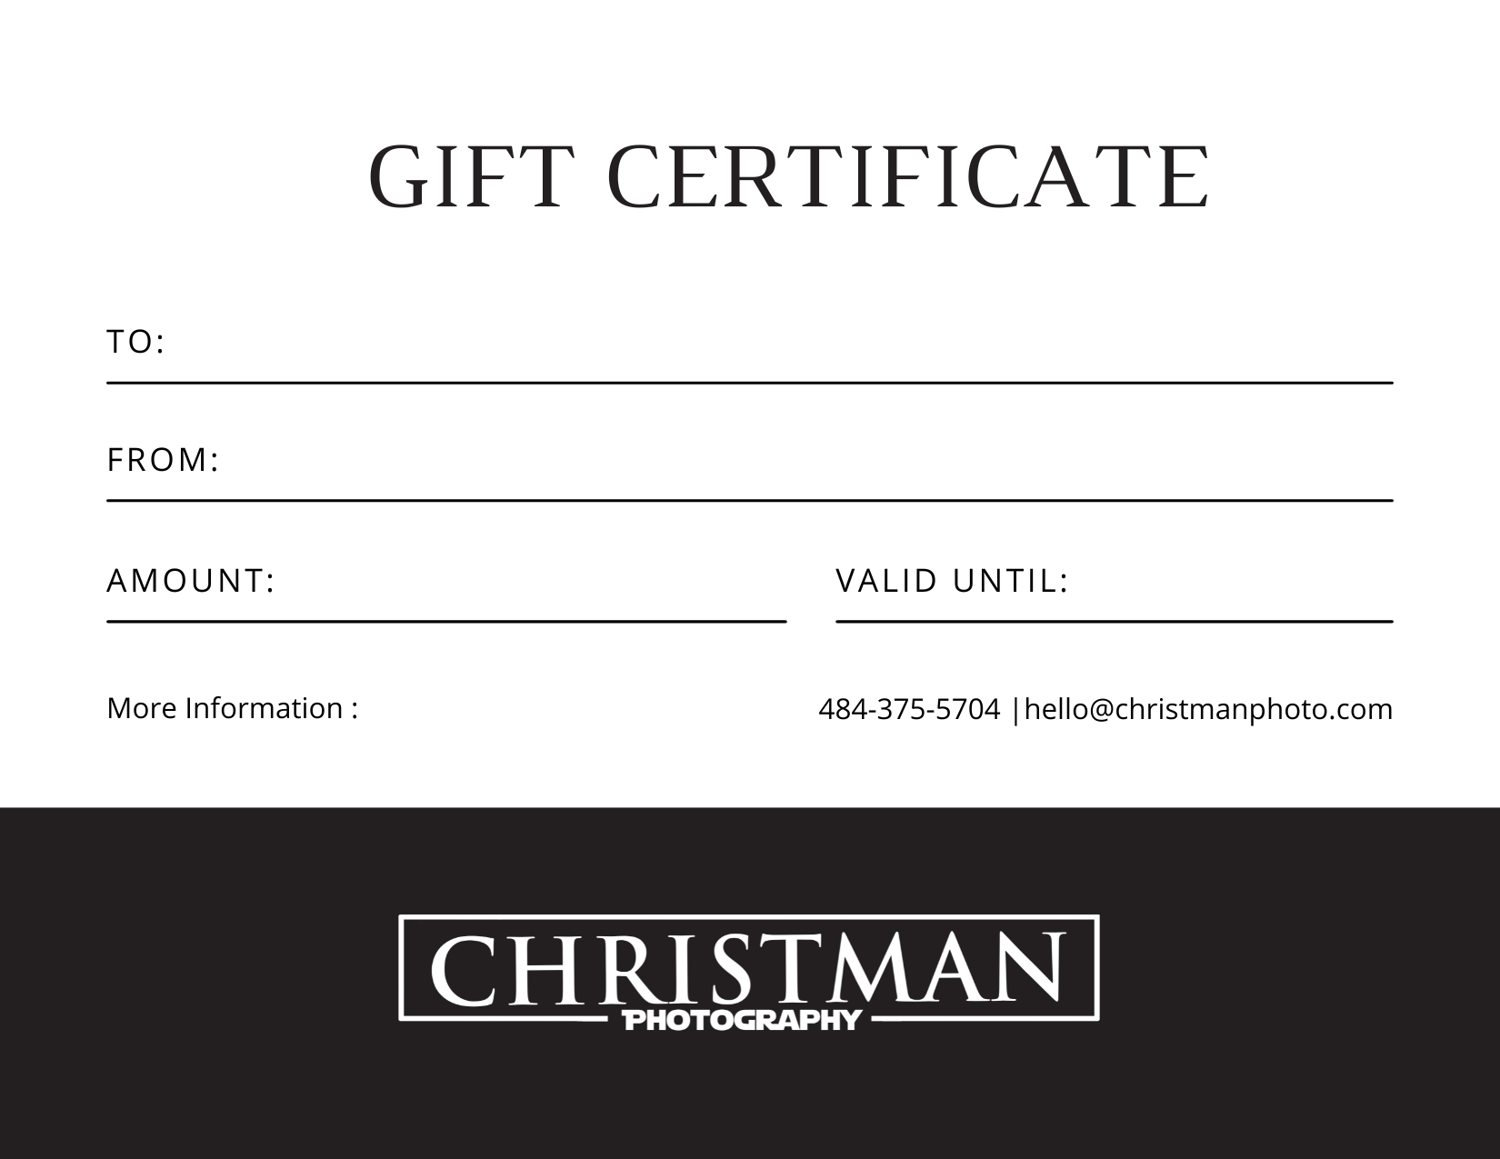 Image of Christman Photography Gift Certificate